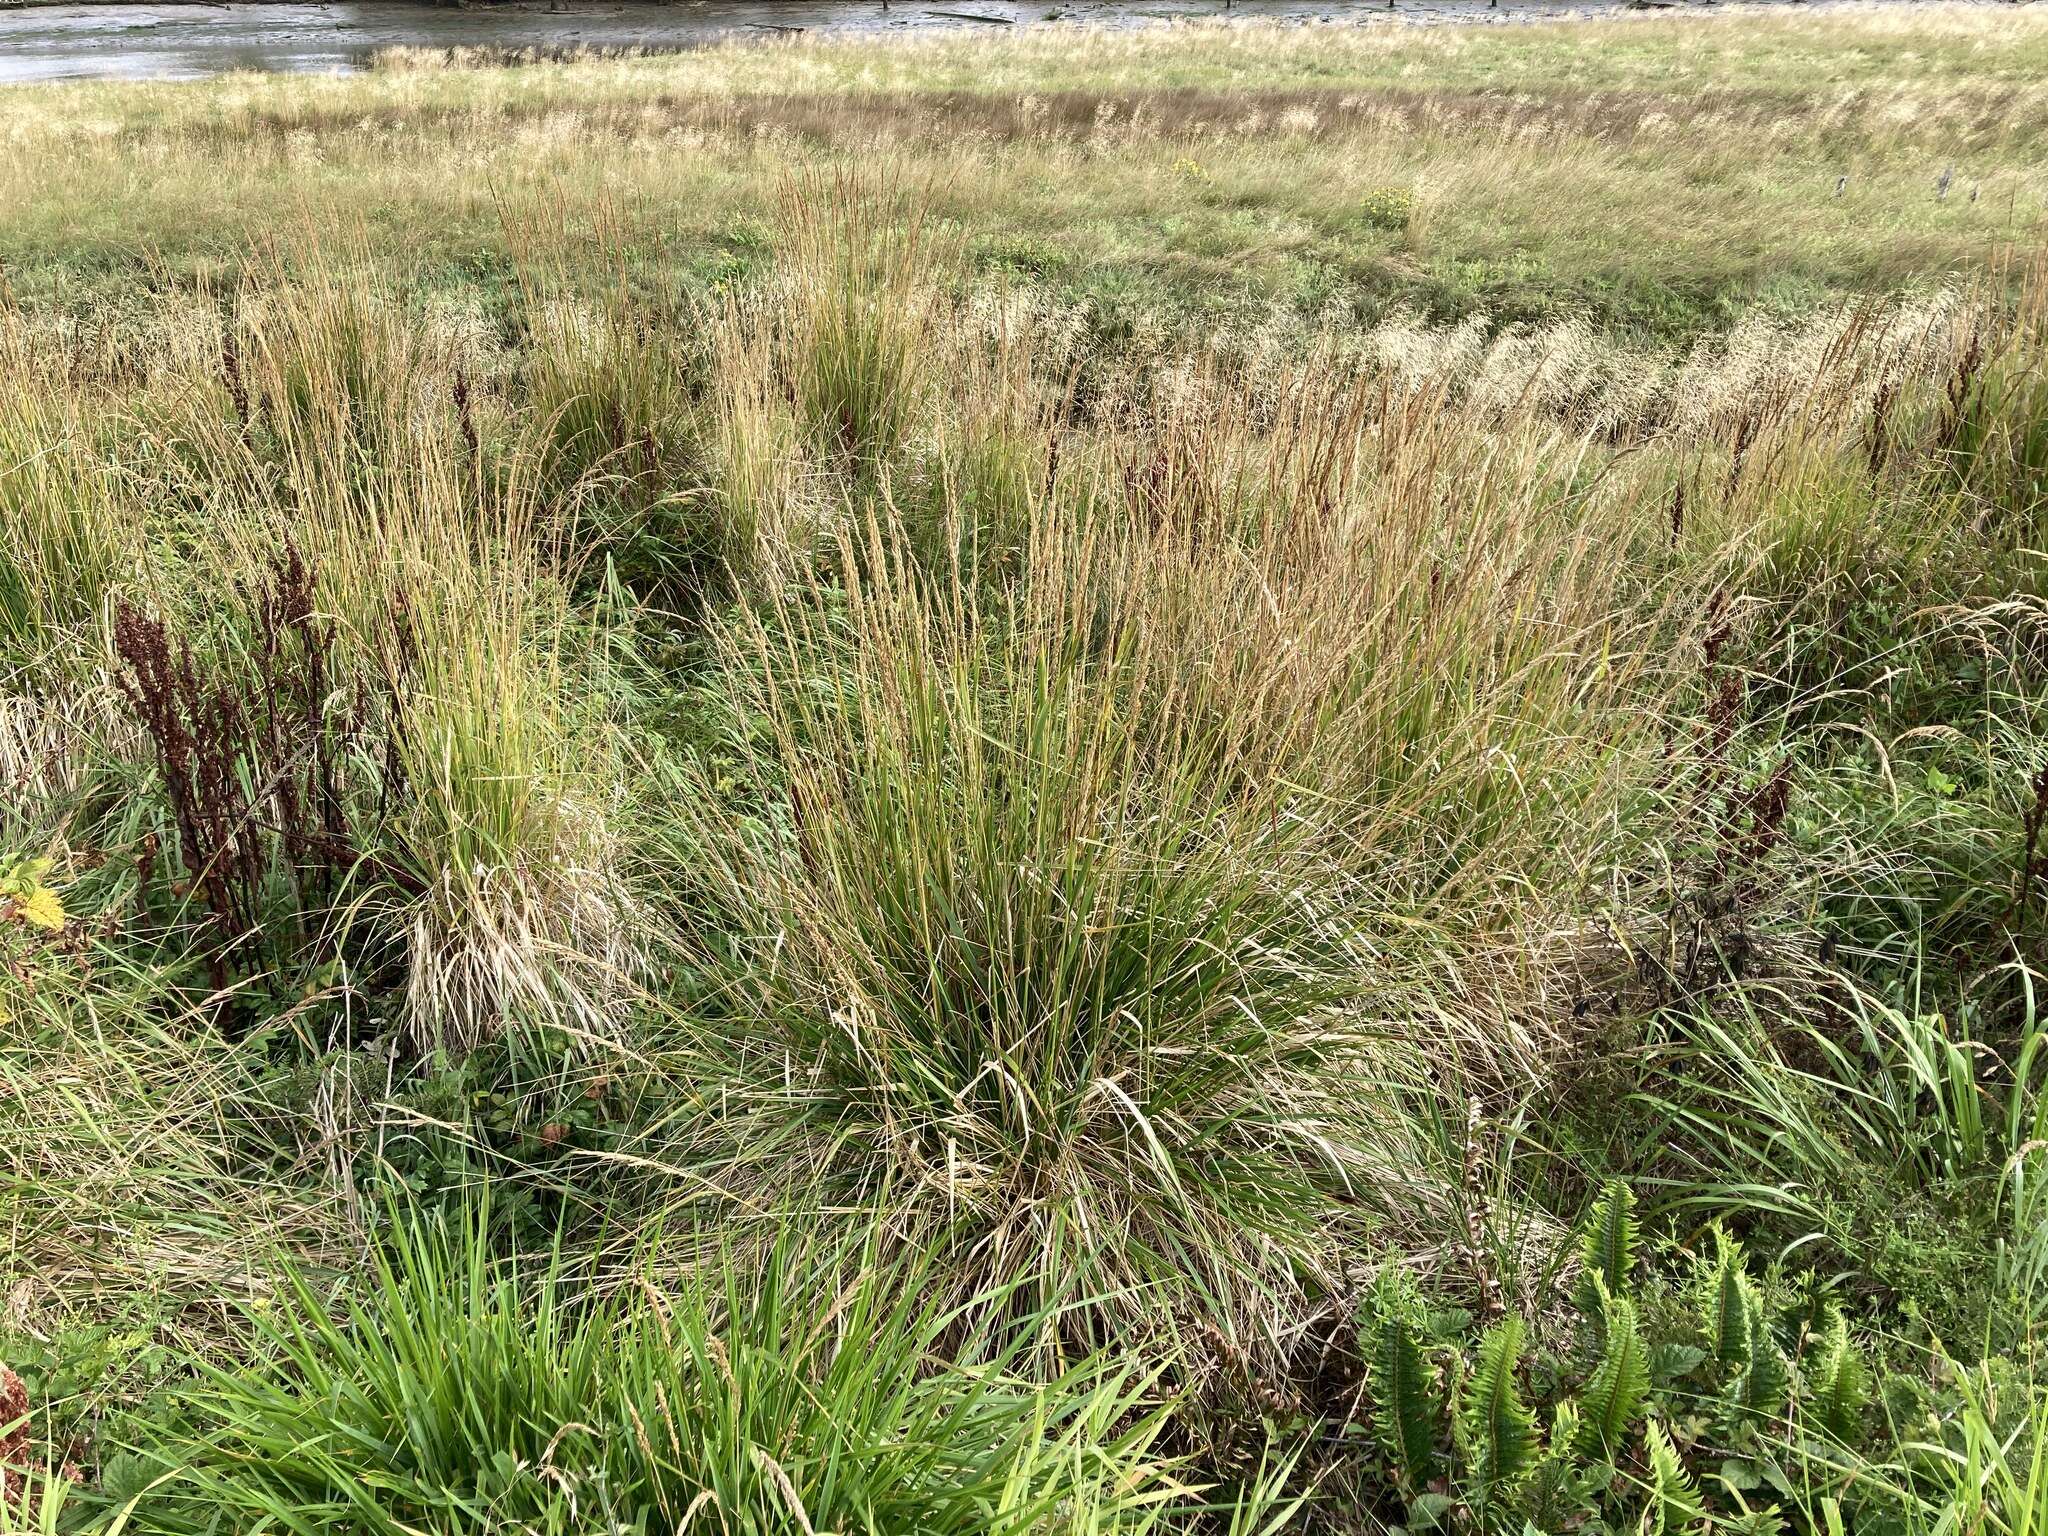 Image of Pacific reedgrass